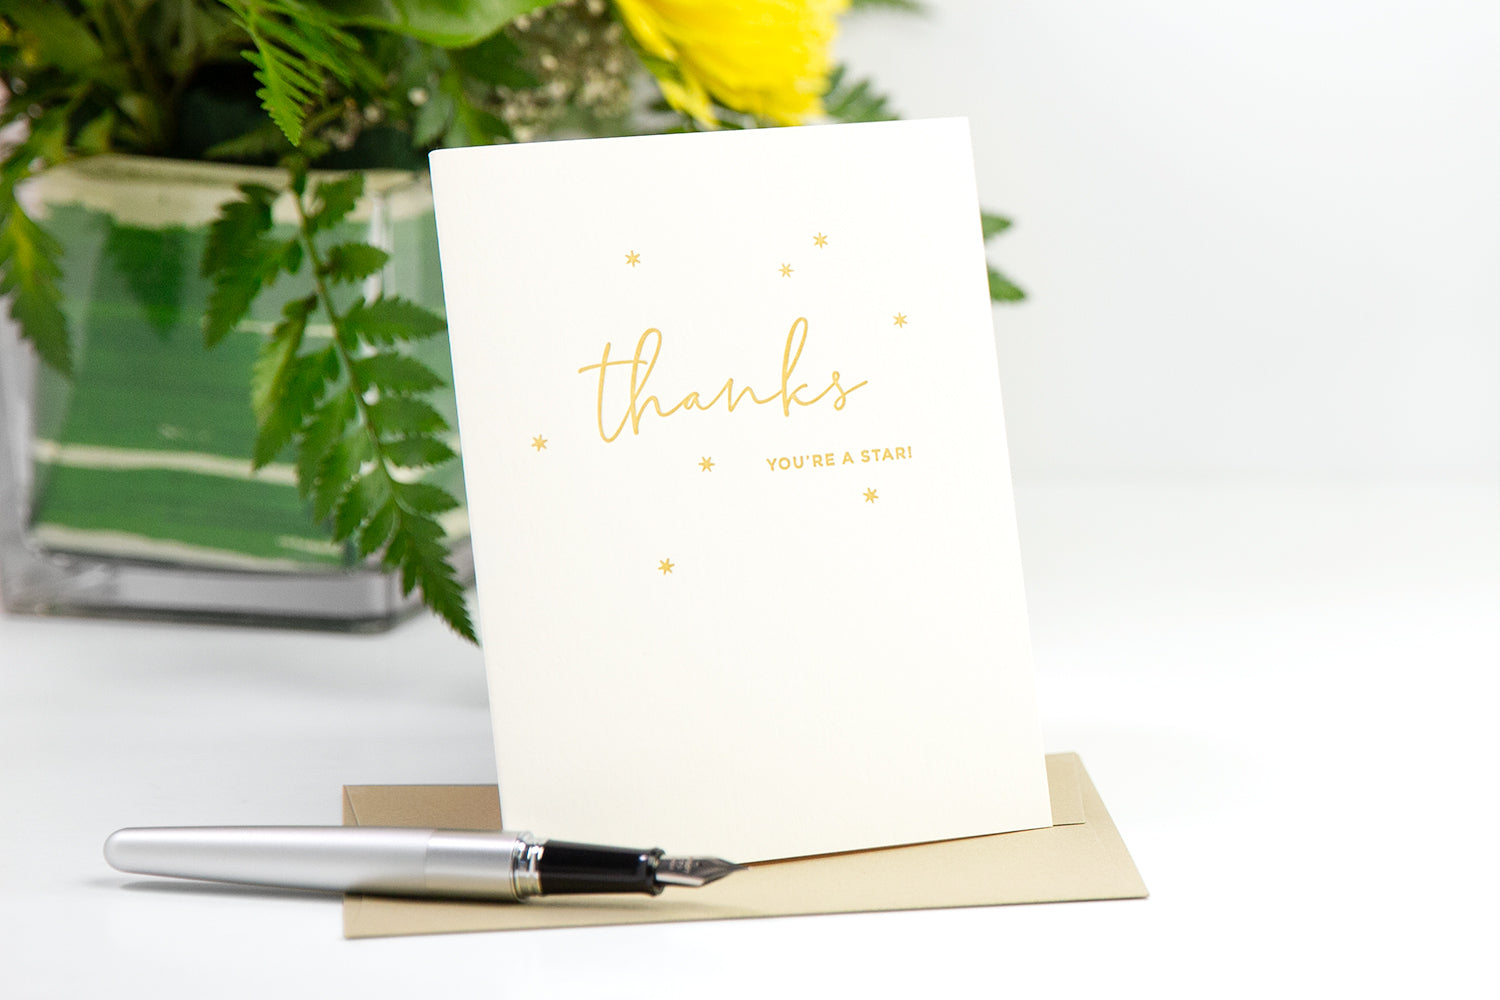 A white thank you card with a gold cursive "thanks" on the front, on a white desk with yellow flowers.